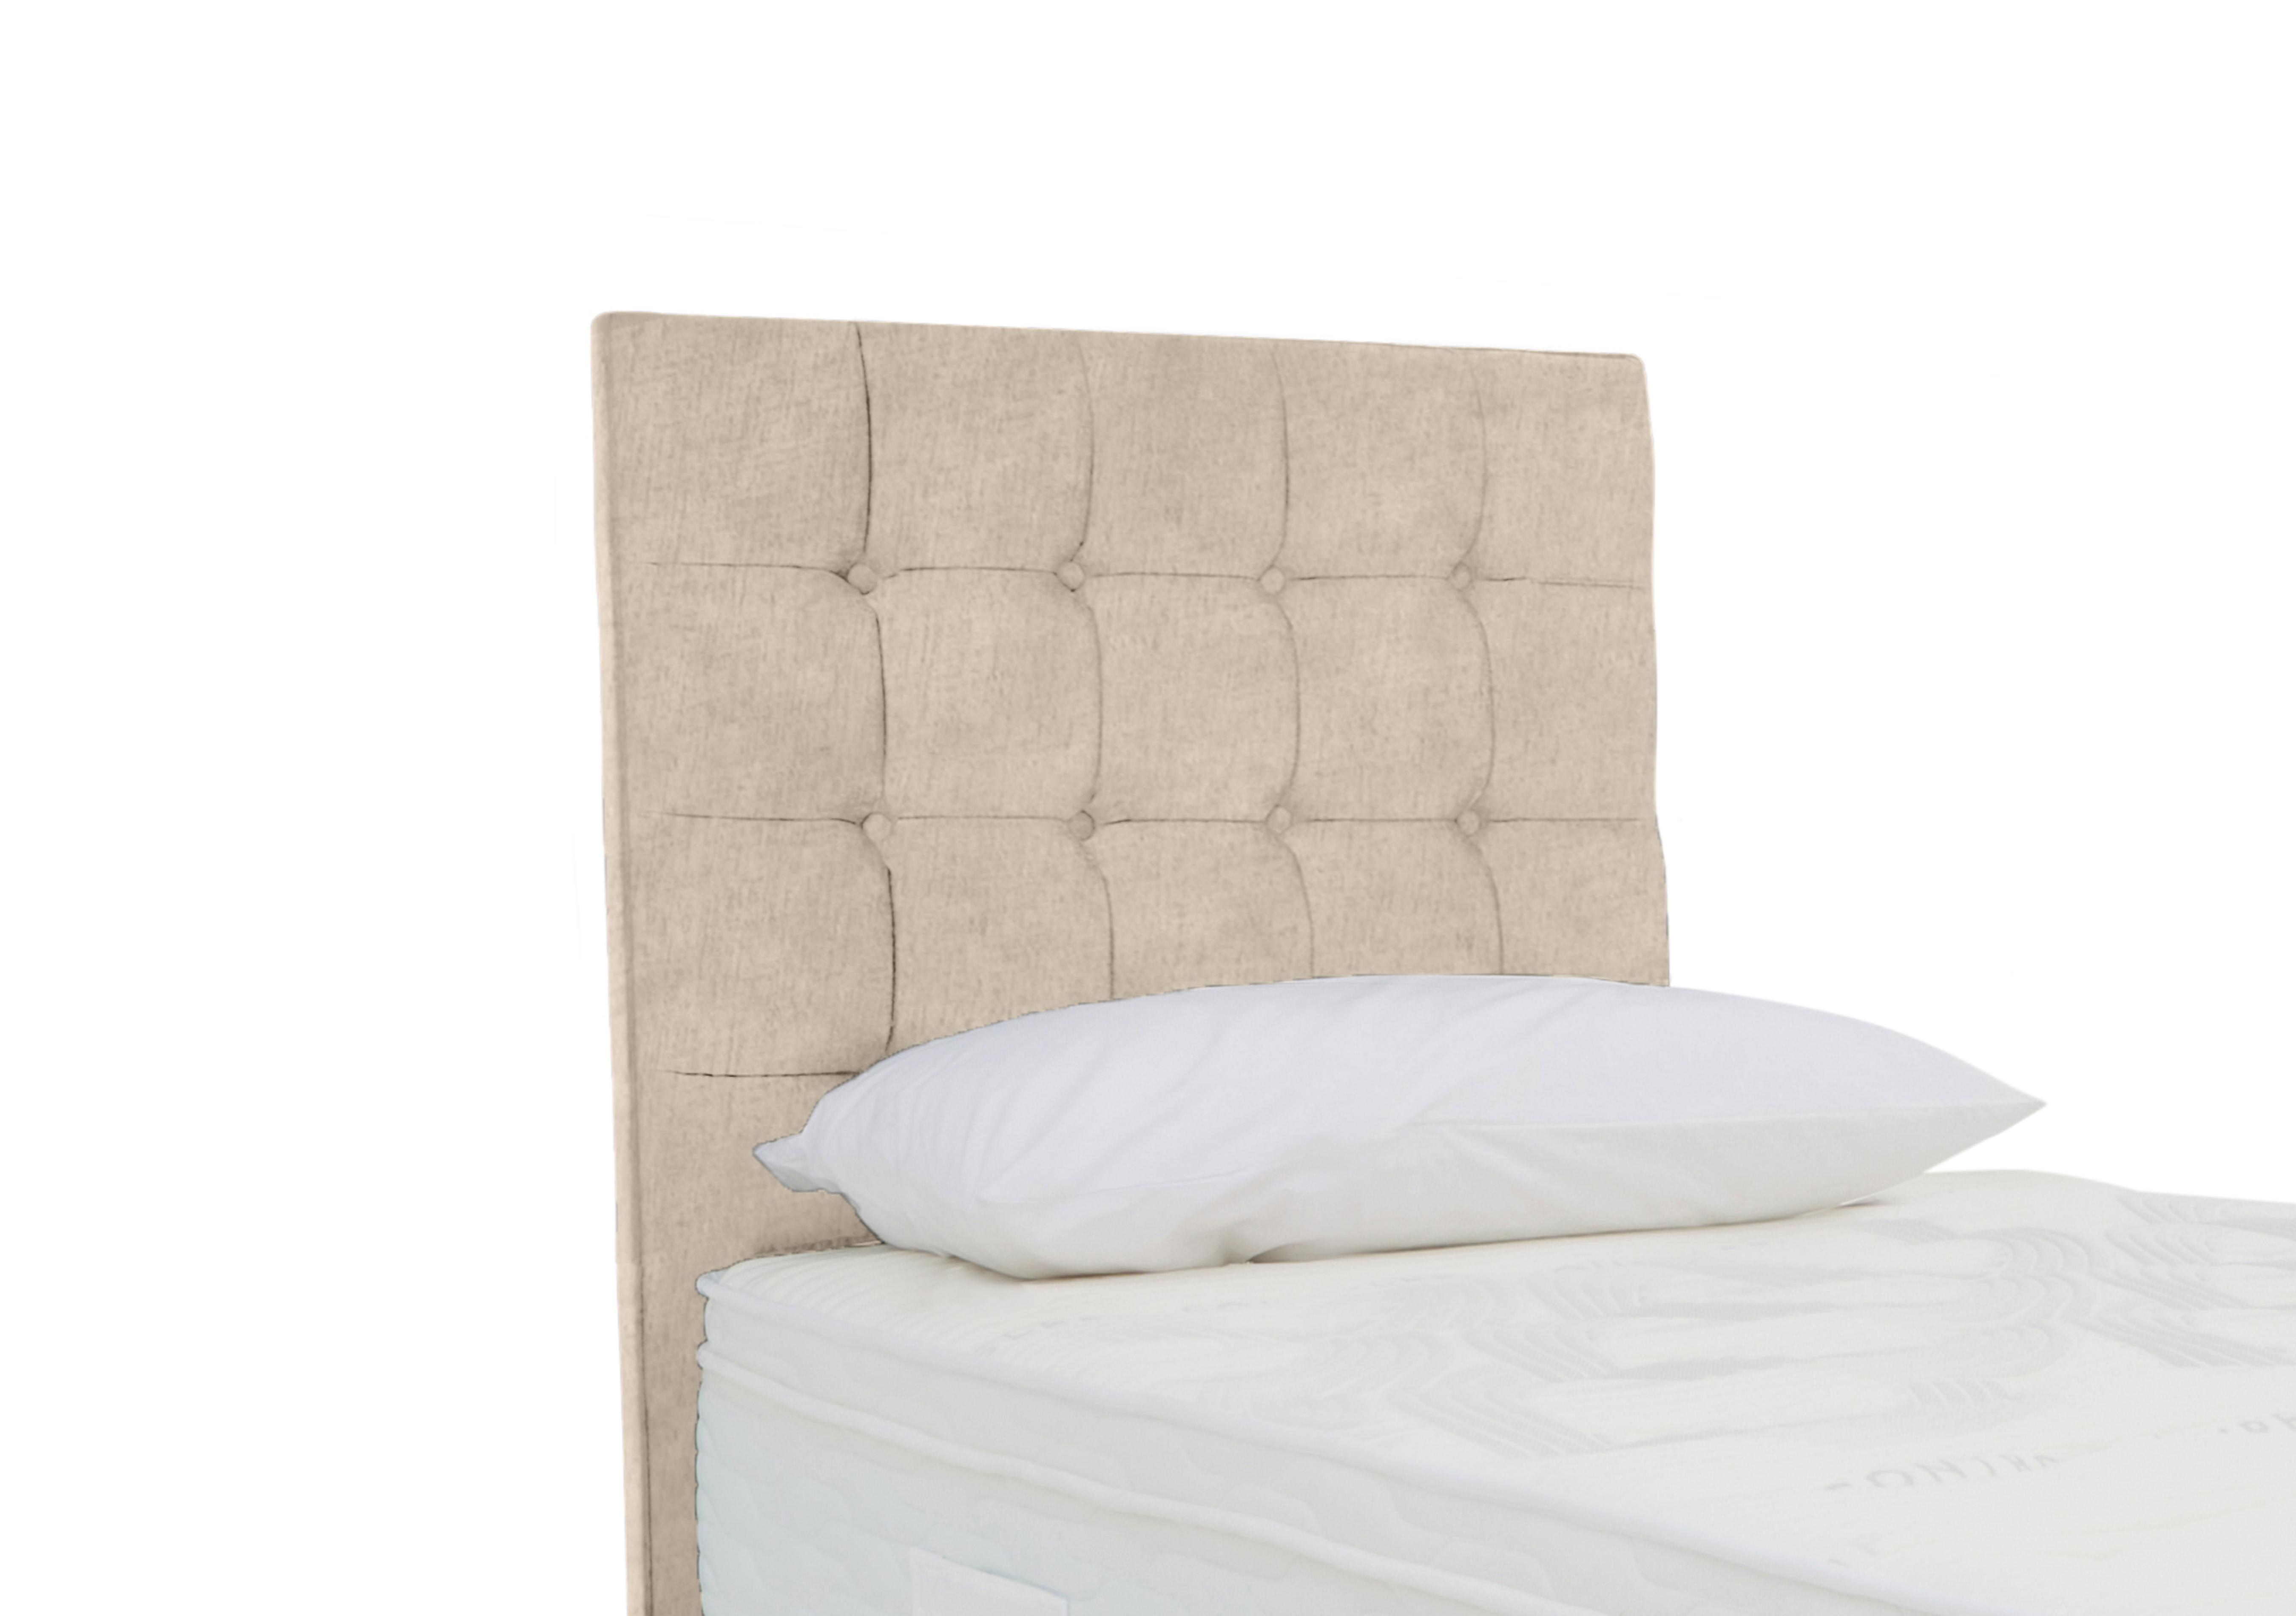 Dice Floor Standing Headboard in Lace Ivory on Furniture Village